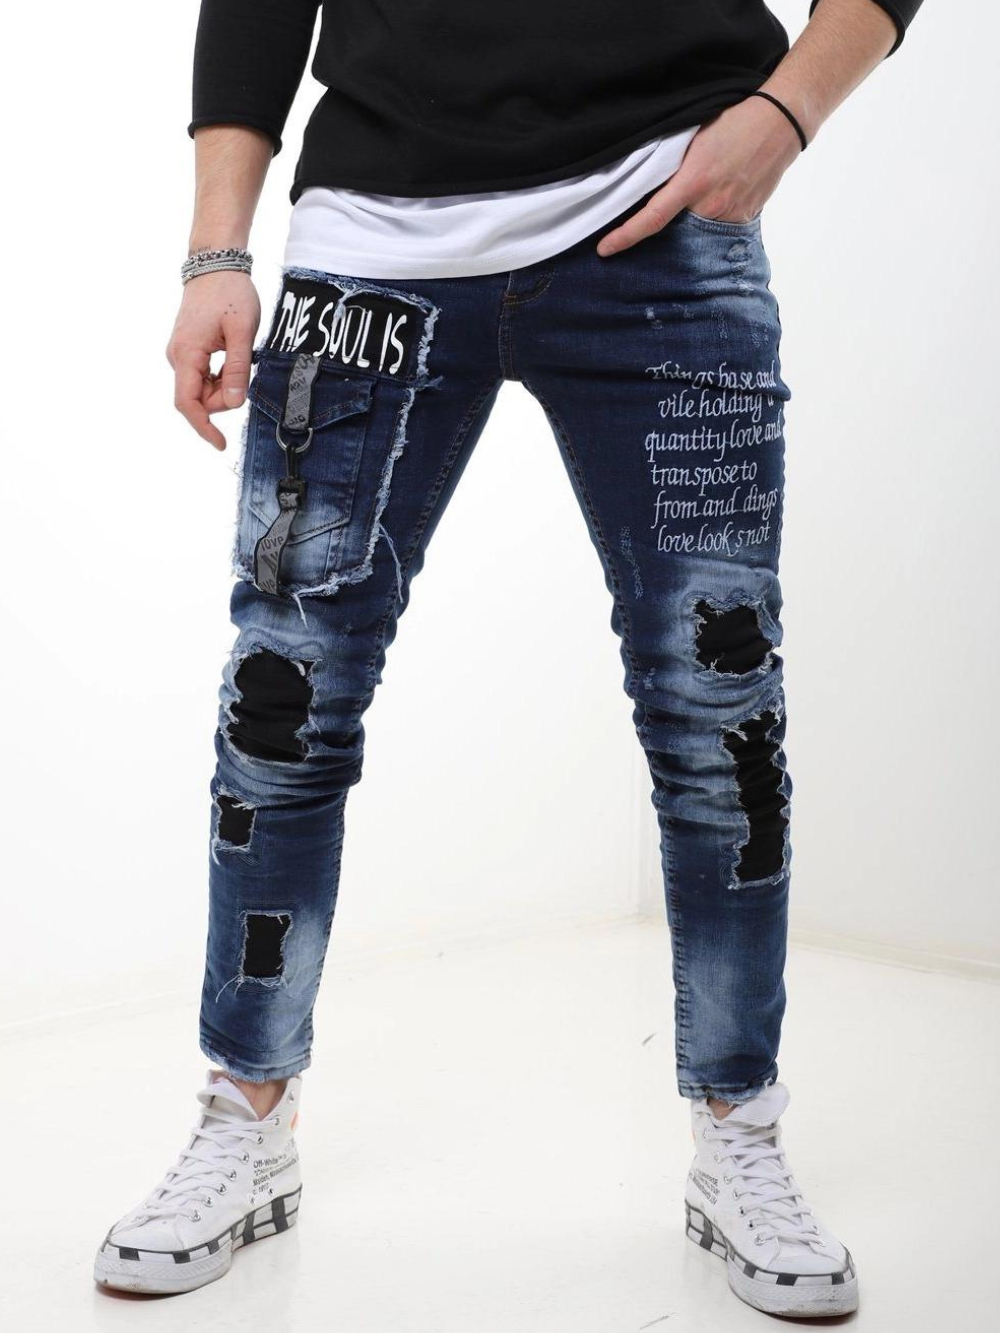 A man wearing ripped jeans and a Blue Soul t - shirt.